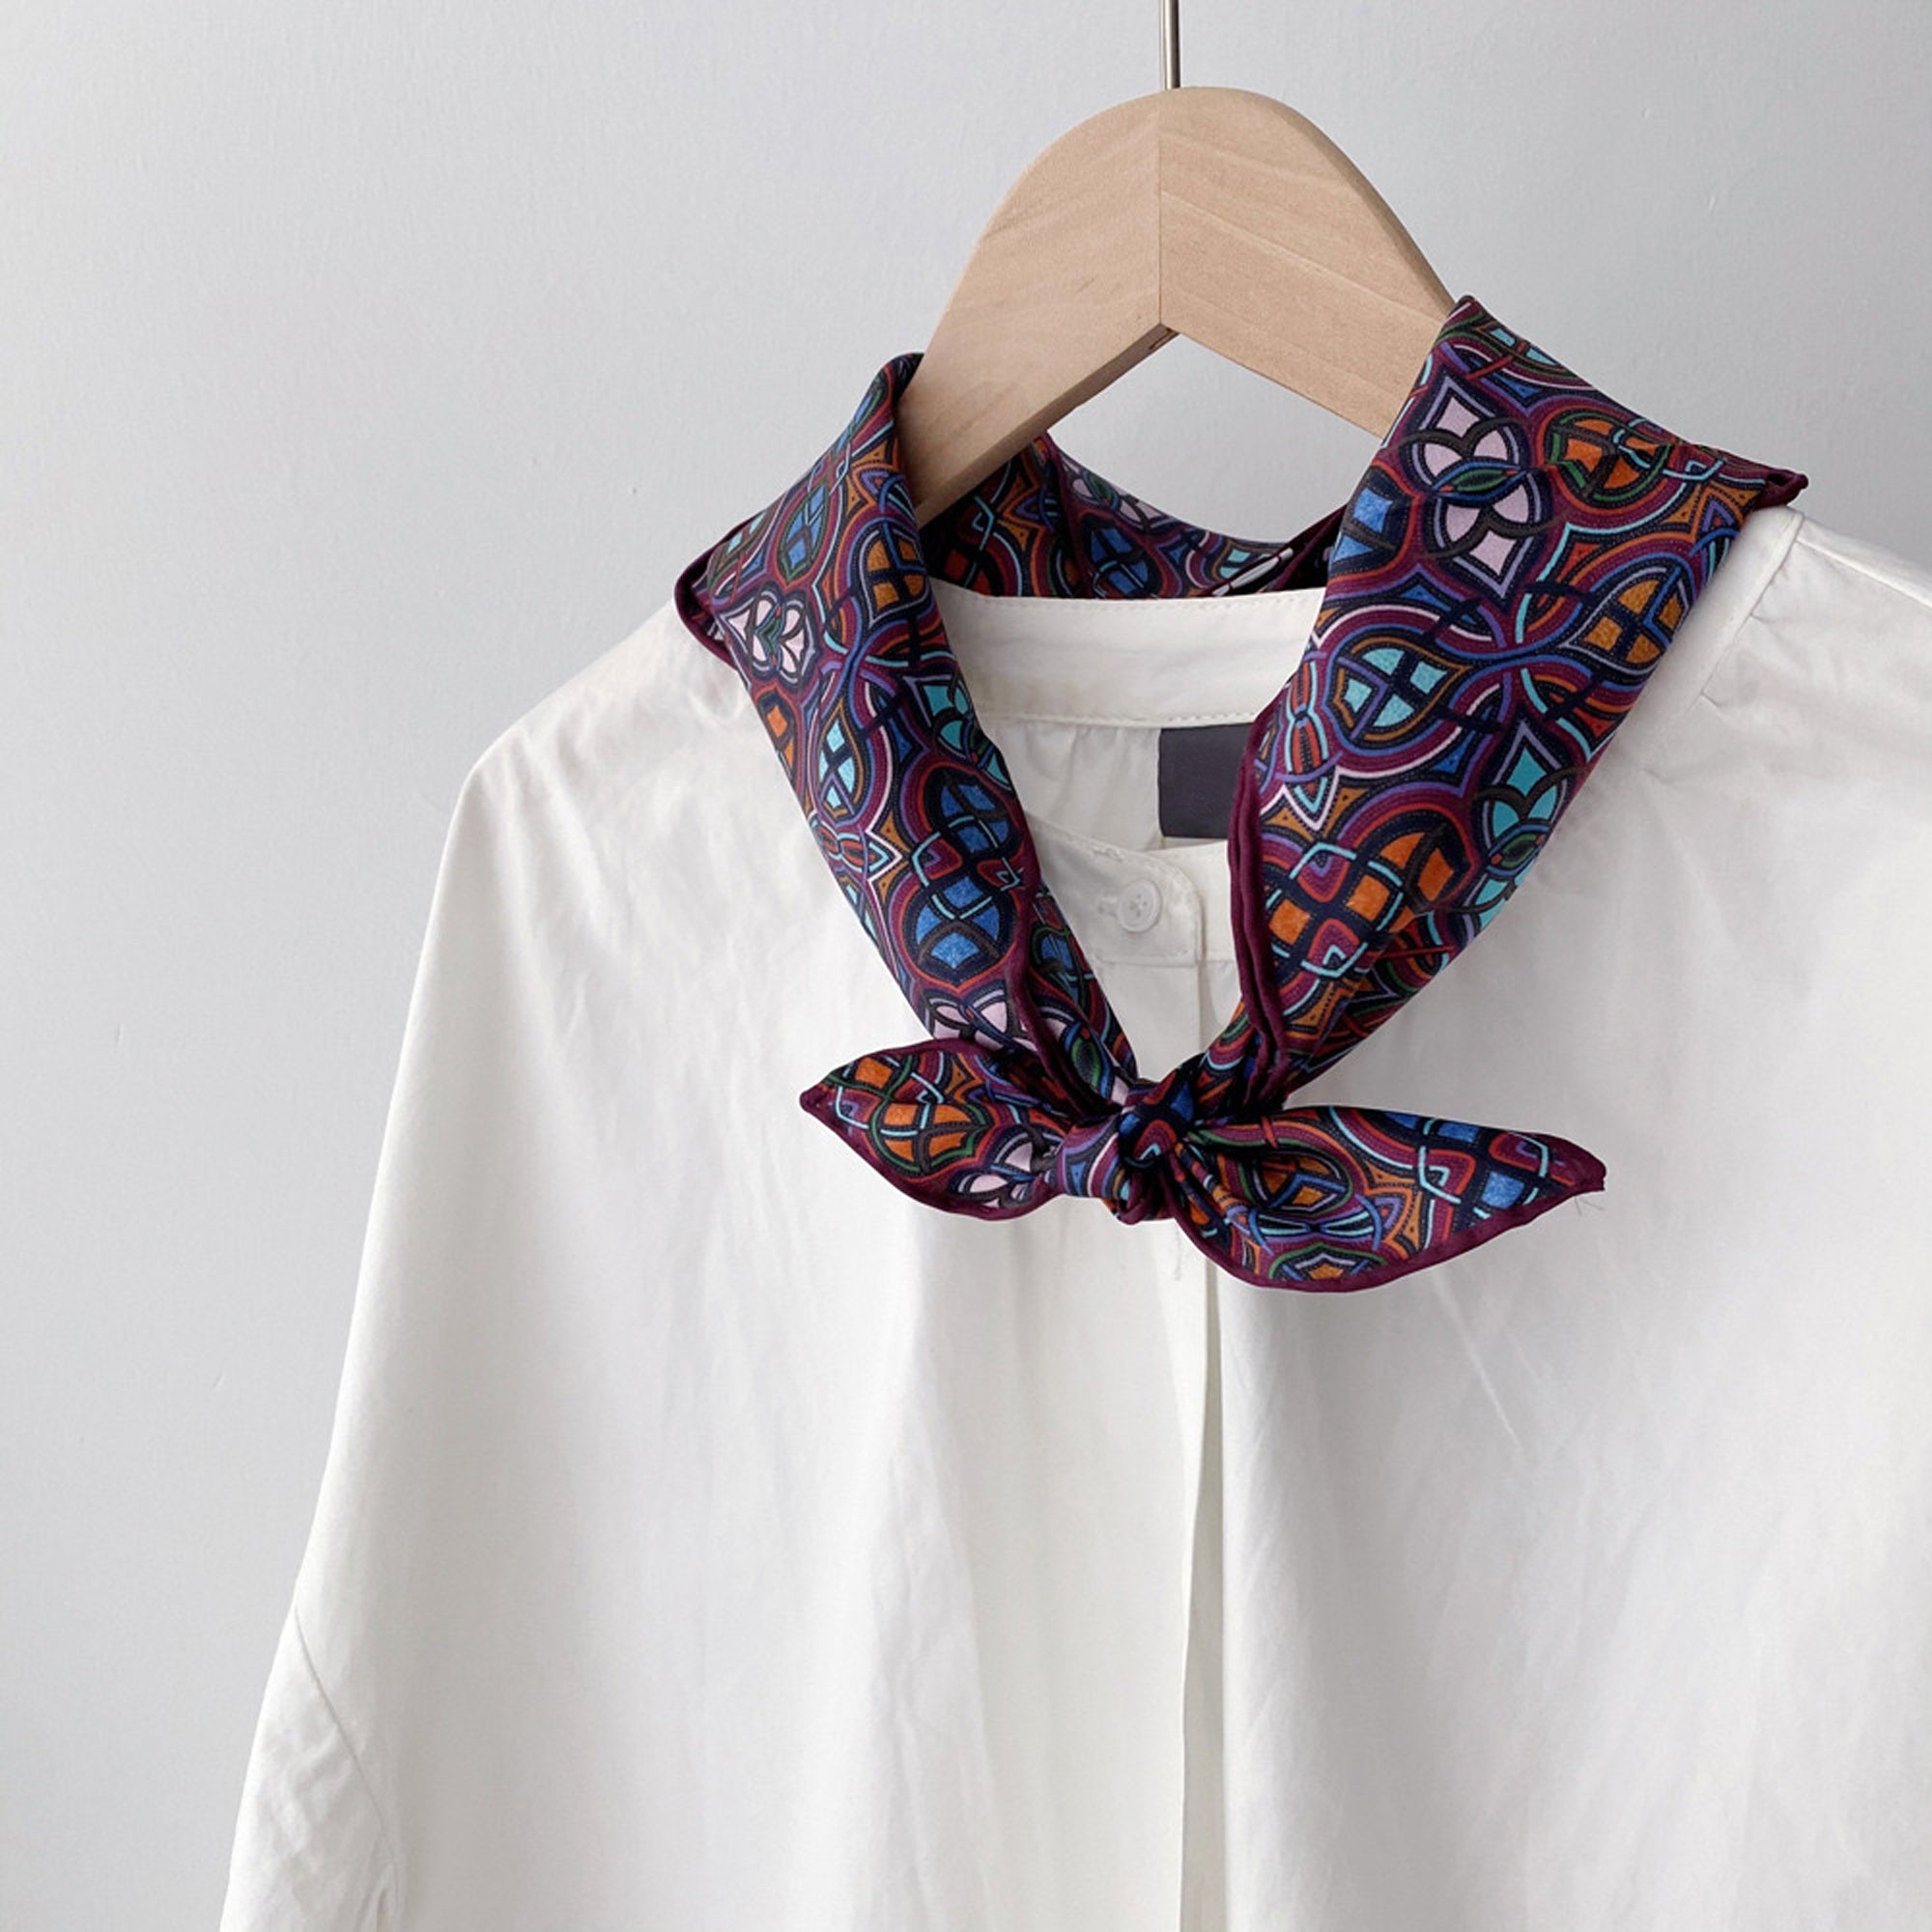 a small silk scarf featuring an abstract intricate pattern in plum purple, blue and orange, knotted as a neck scarf, paired with a women's white blouse